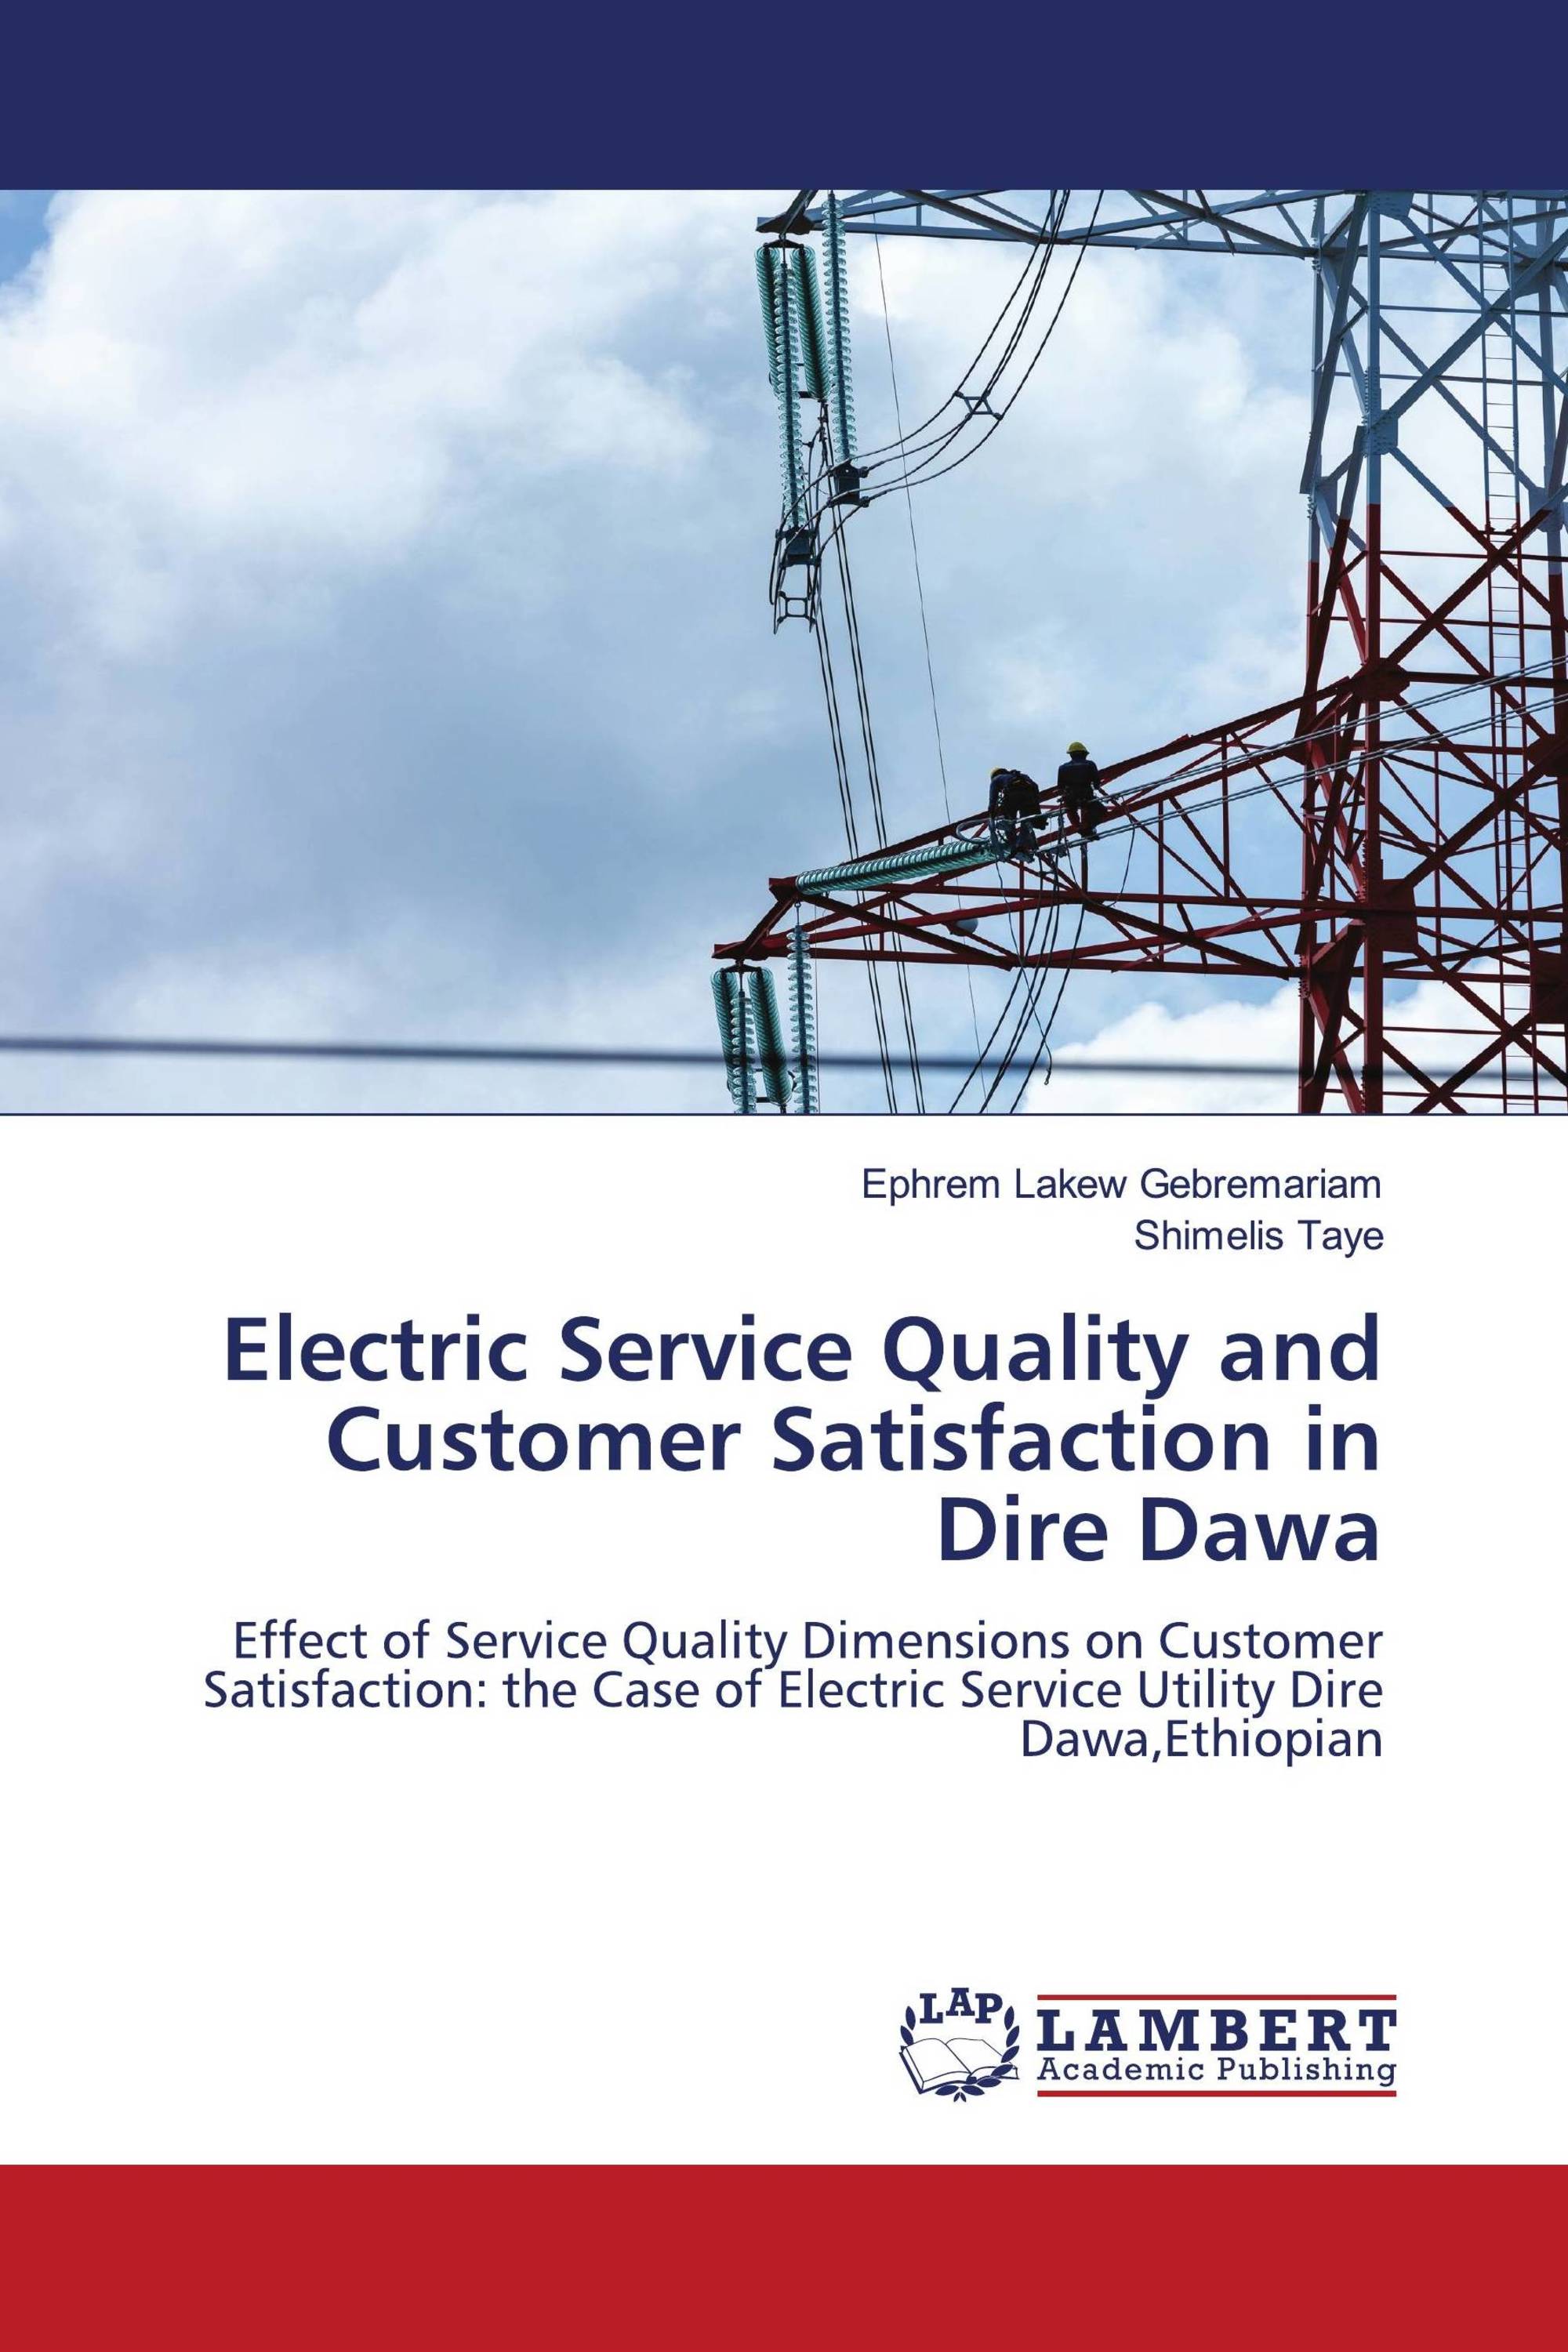 Electric Service Quality and Customer Satisfaction in Dire Dawa